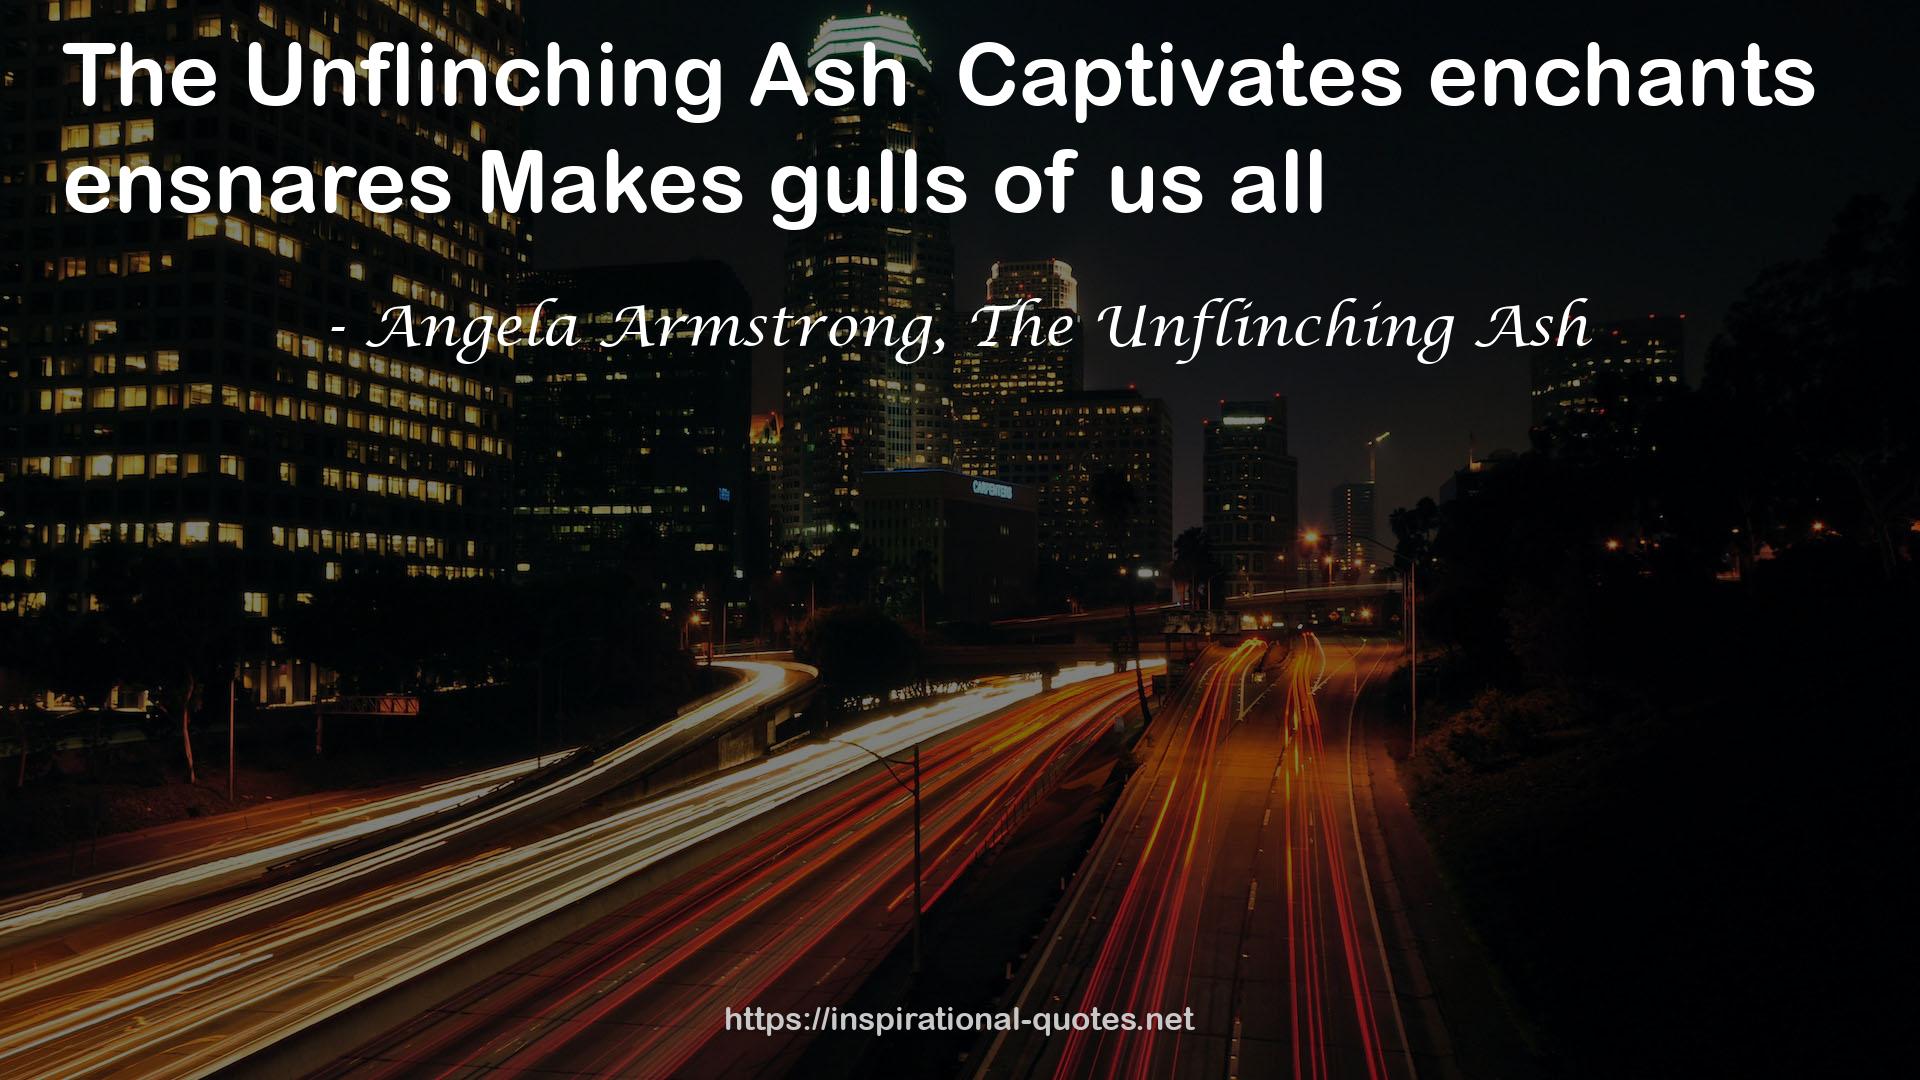 Angela Armstrong, The Unflinching Ash QUOTES